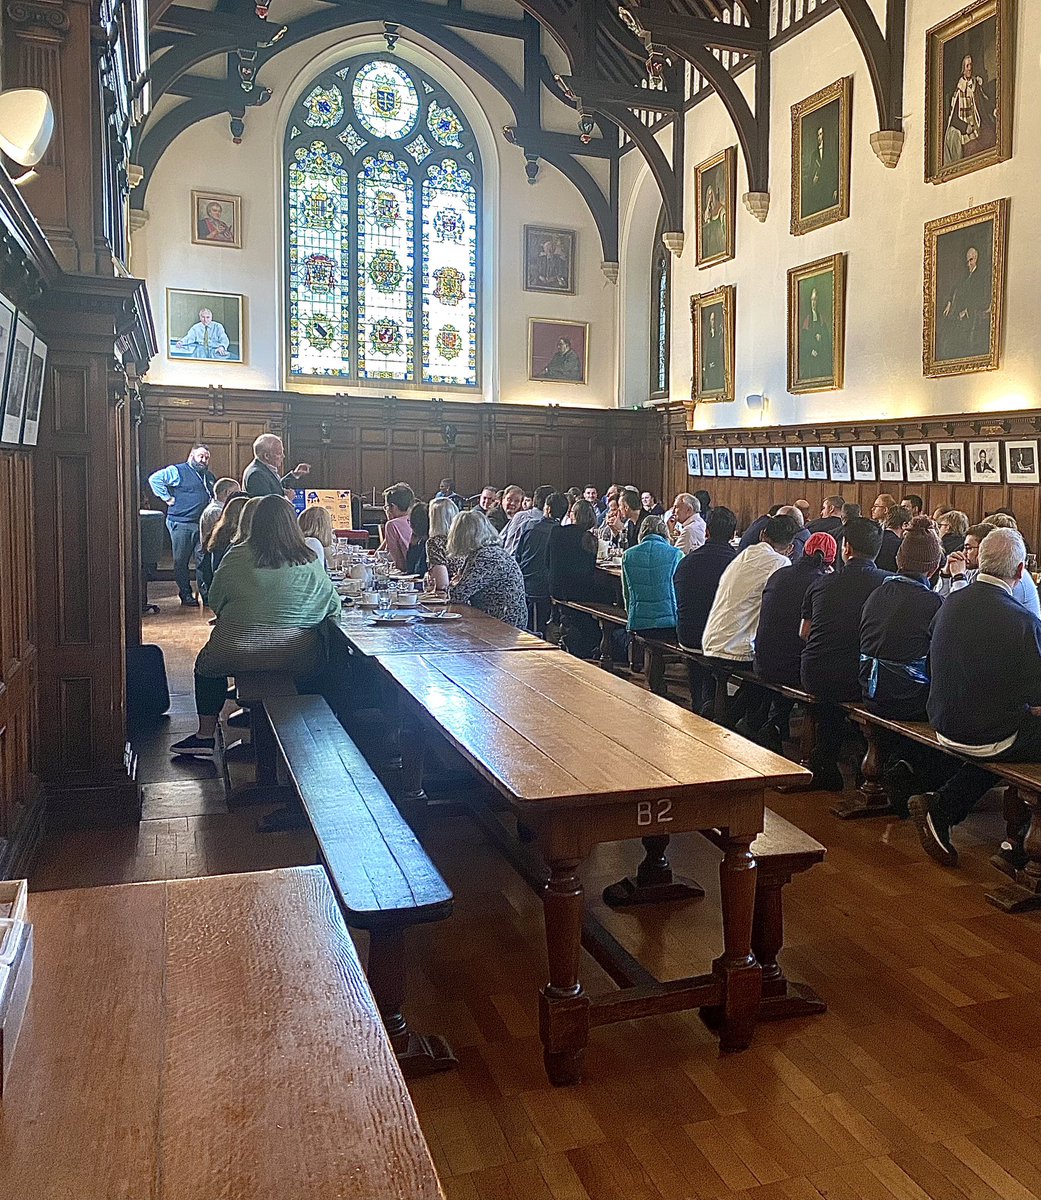 Univ North themed breakfast session earlier today, joined by all staff members. It was a fantastic way to reconnect after Giving Day and the holiday break. 💛 #Univ #UniversityCollegeOxford